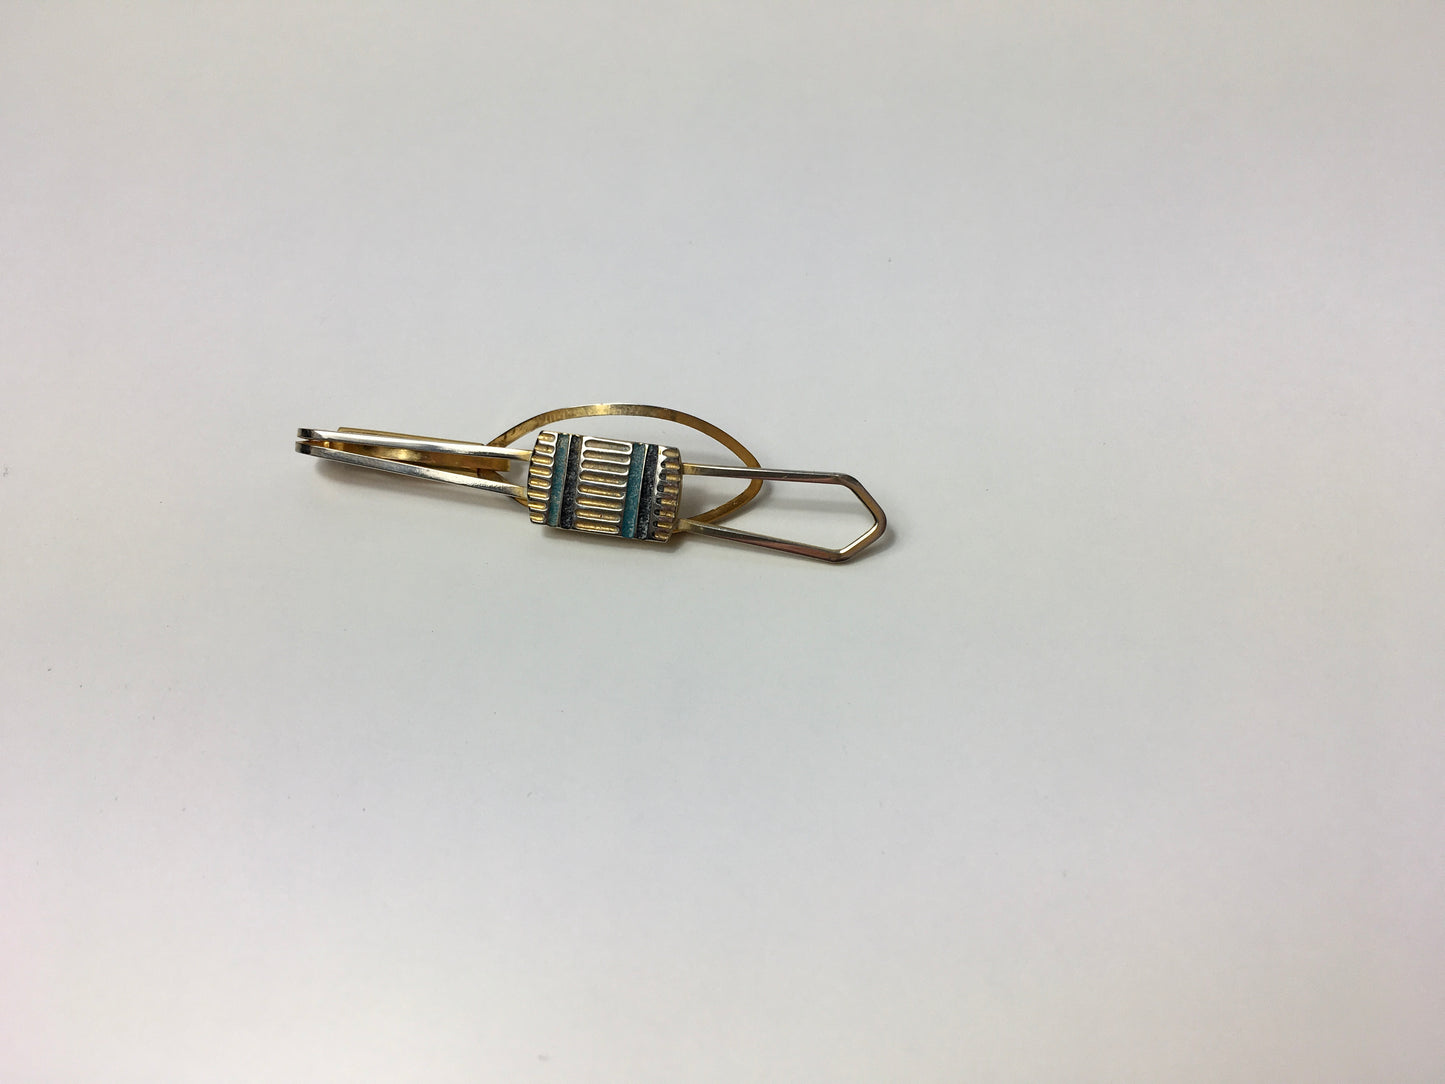 Original Gents Tie Pin - In a Gold Colour with Contrast Stripes in Light and Dark Blue